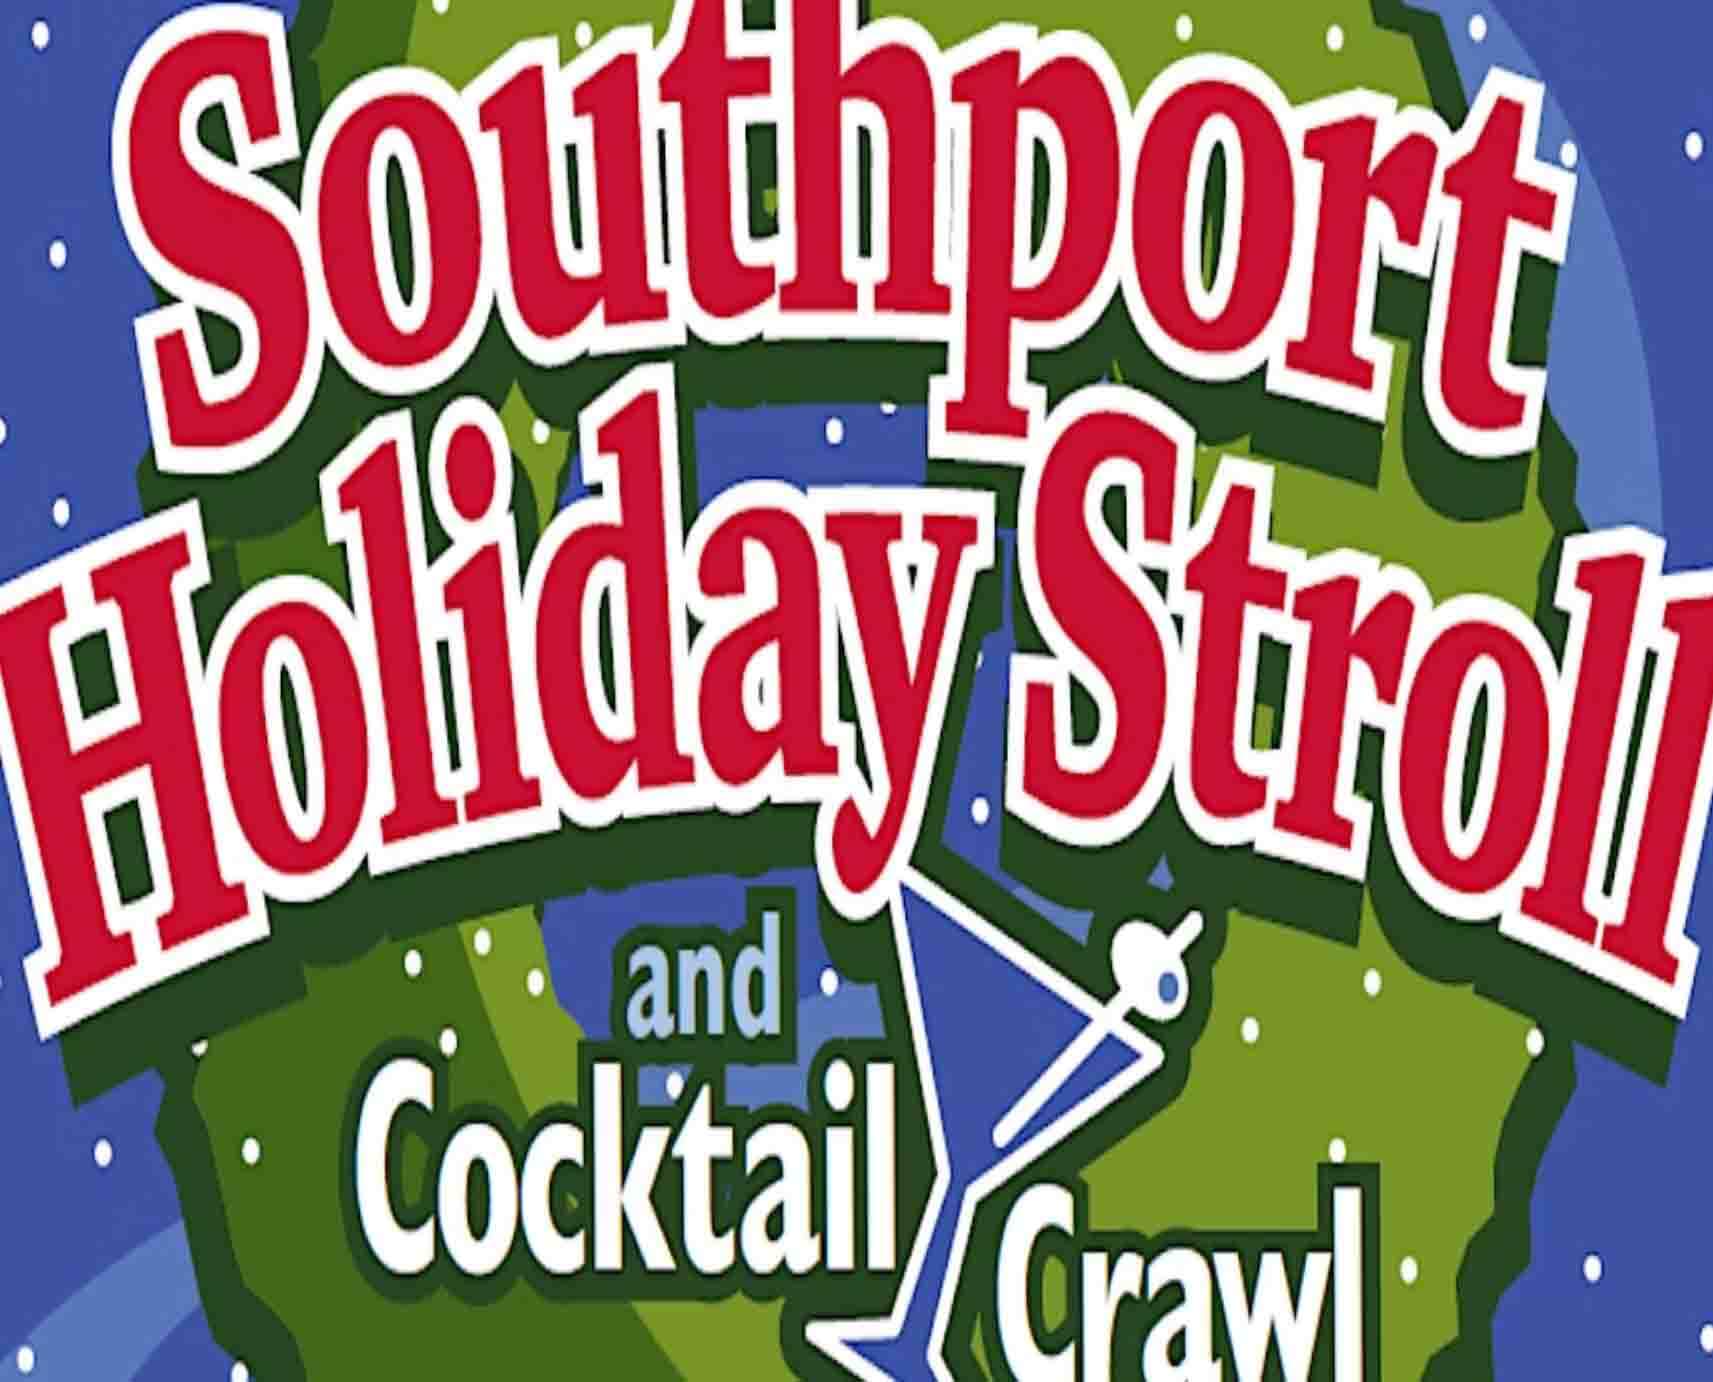 Southport Holiday Stroll & Cocktail Crawl